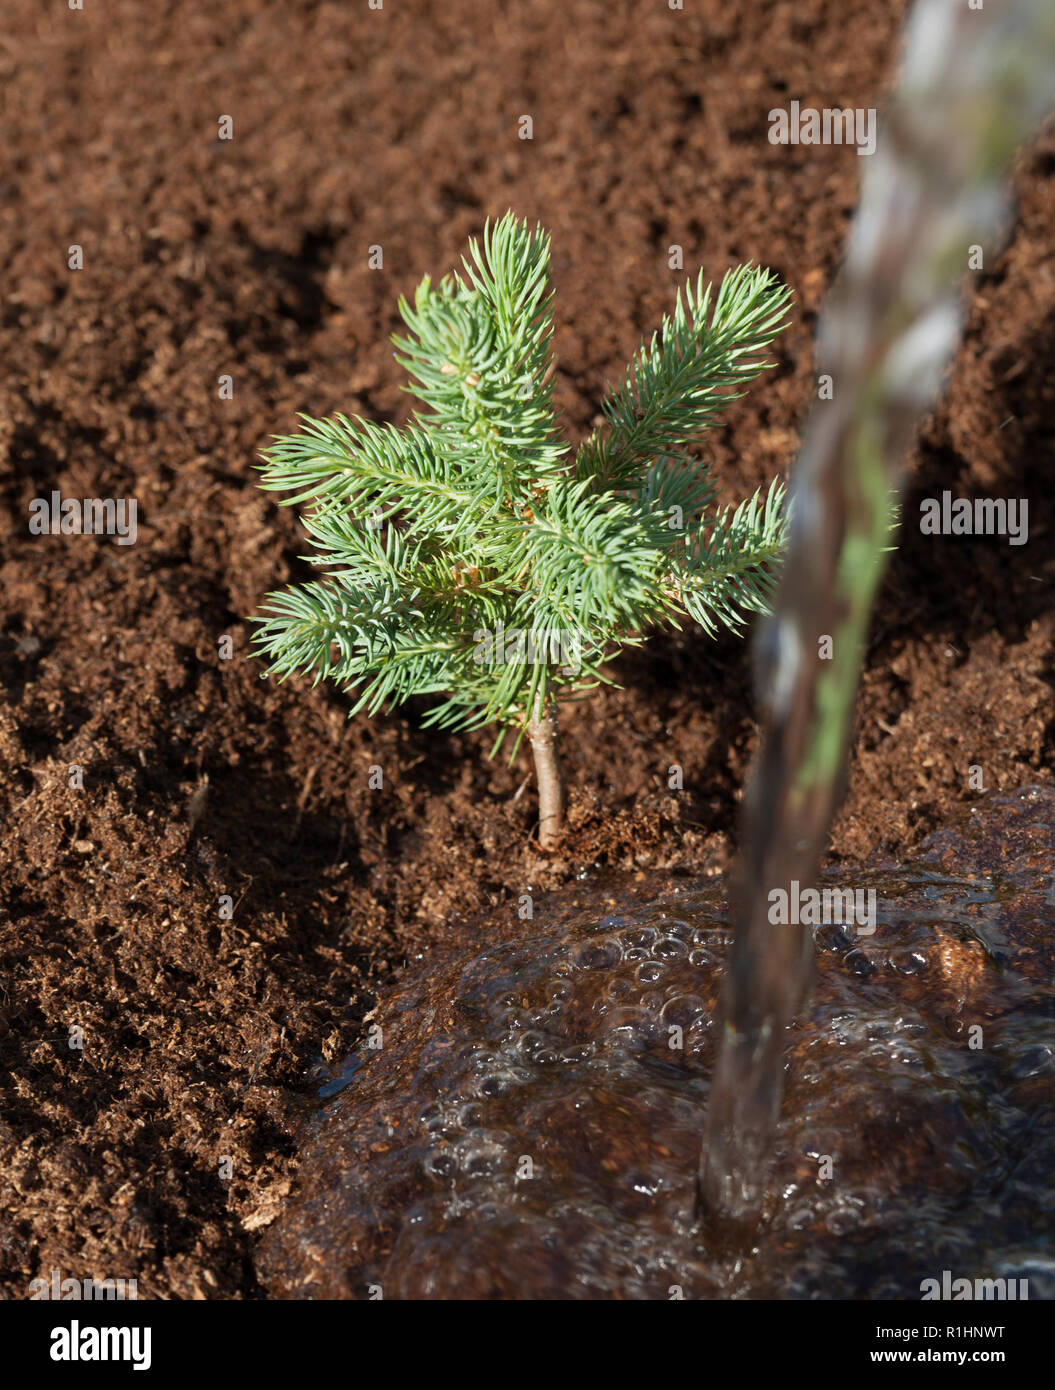 Planting of a fir tree in a ground. Stock Photo